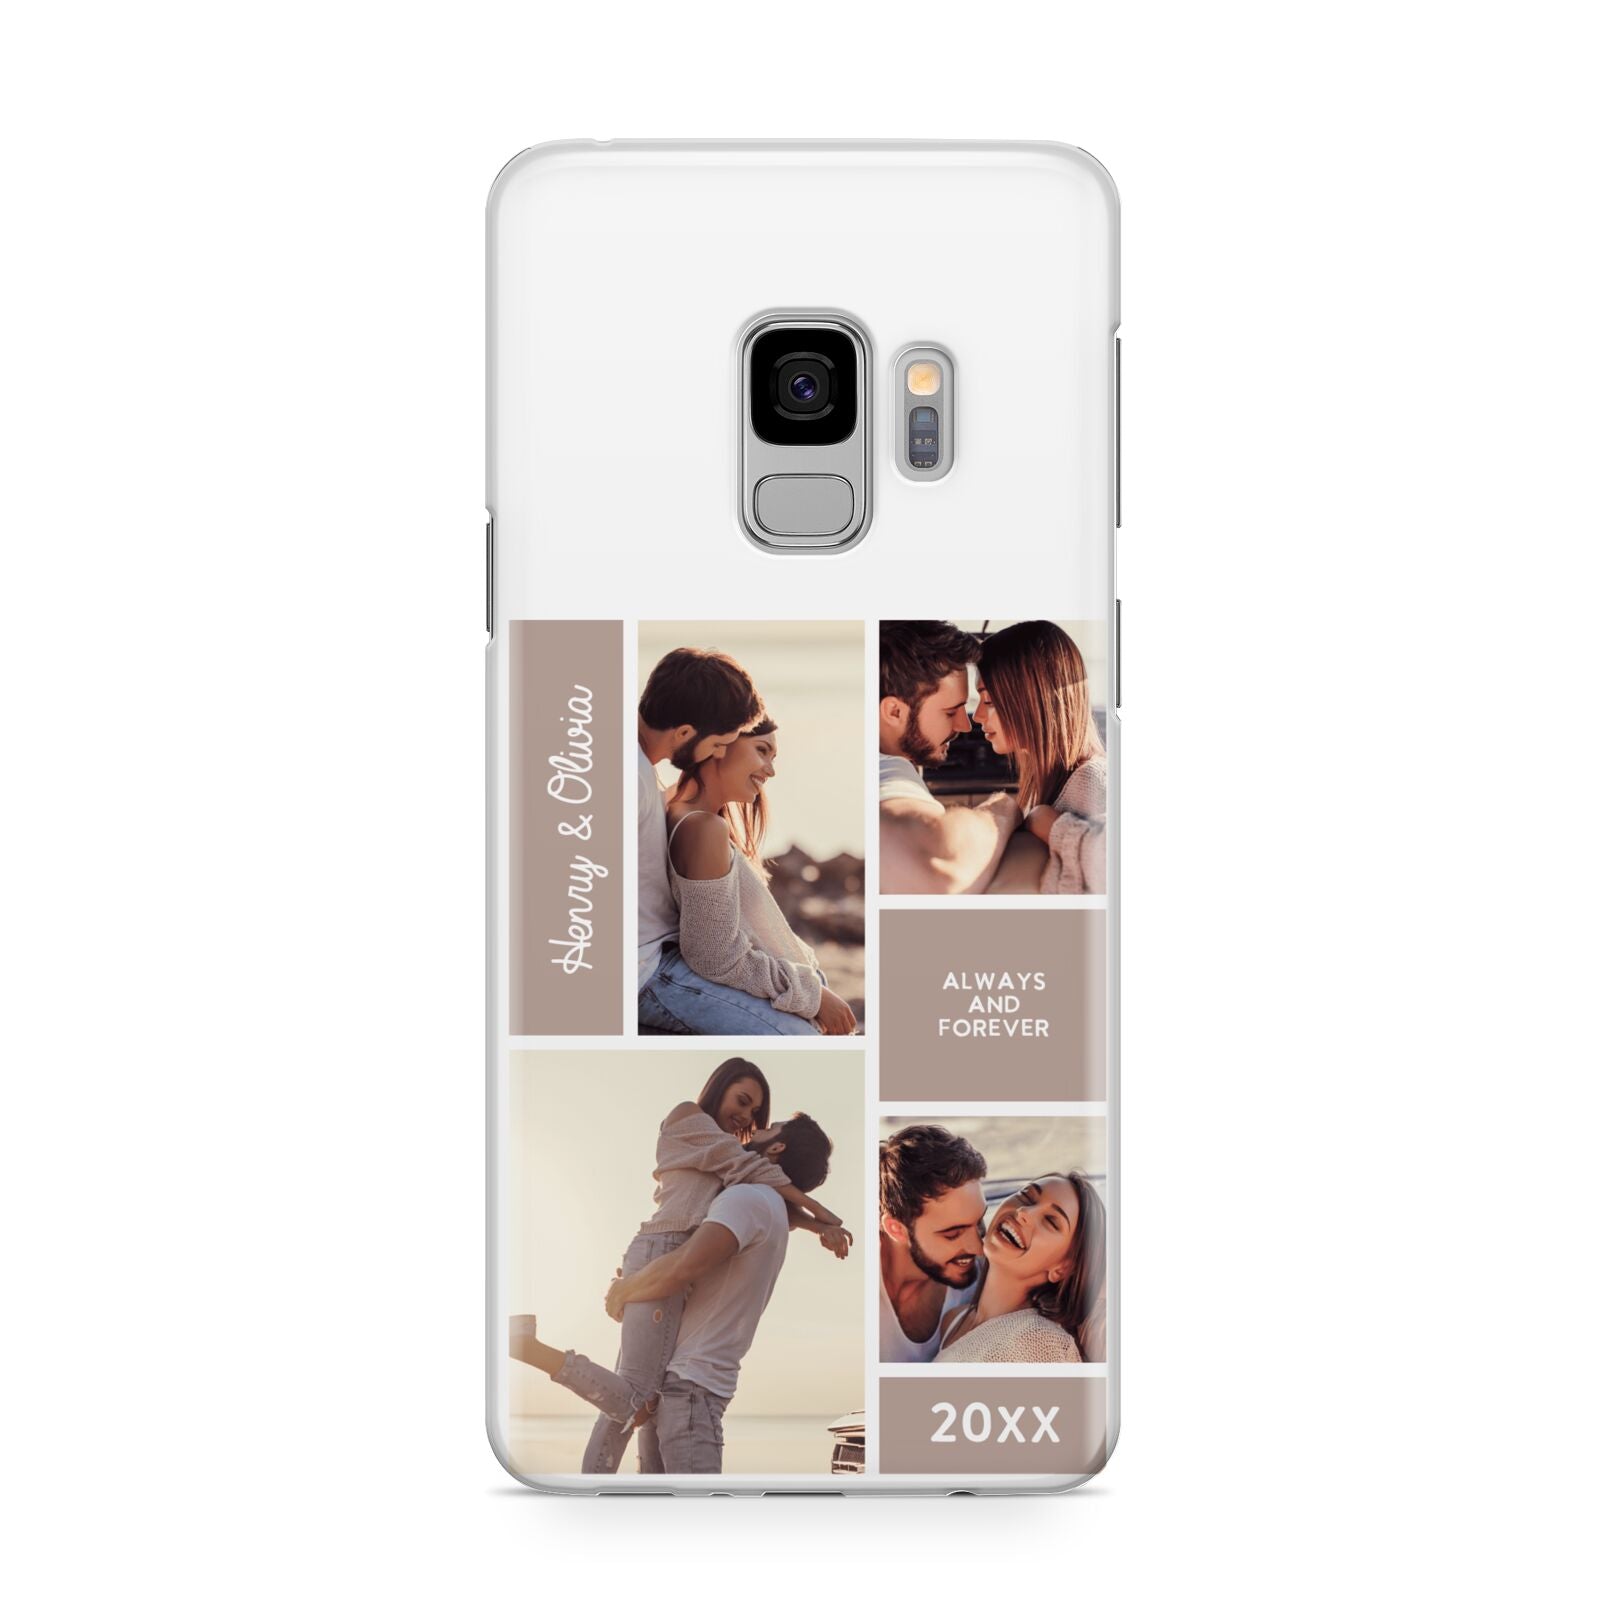 Couples Valentine Photo Collage Personalised Samsung Galaxy S9 Case